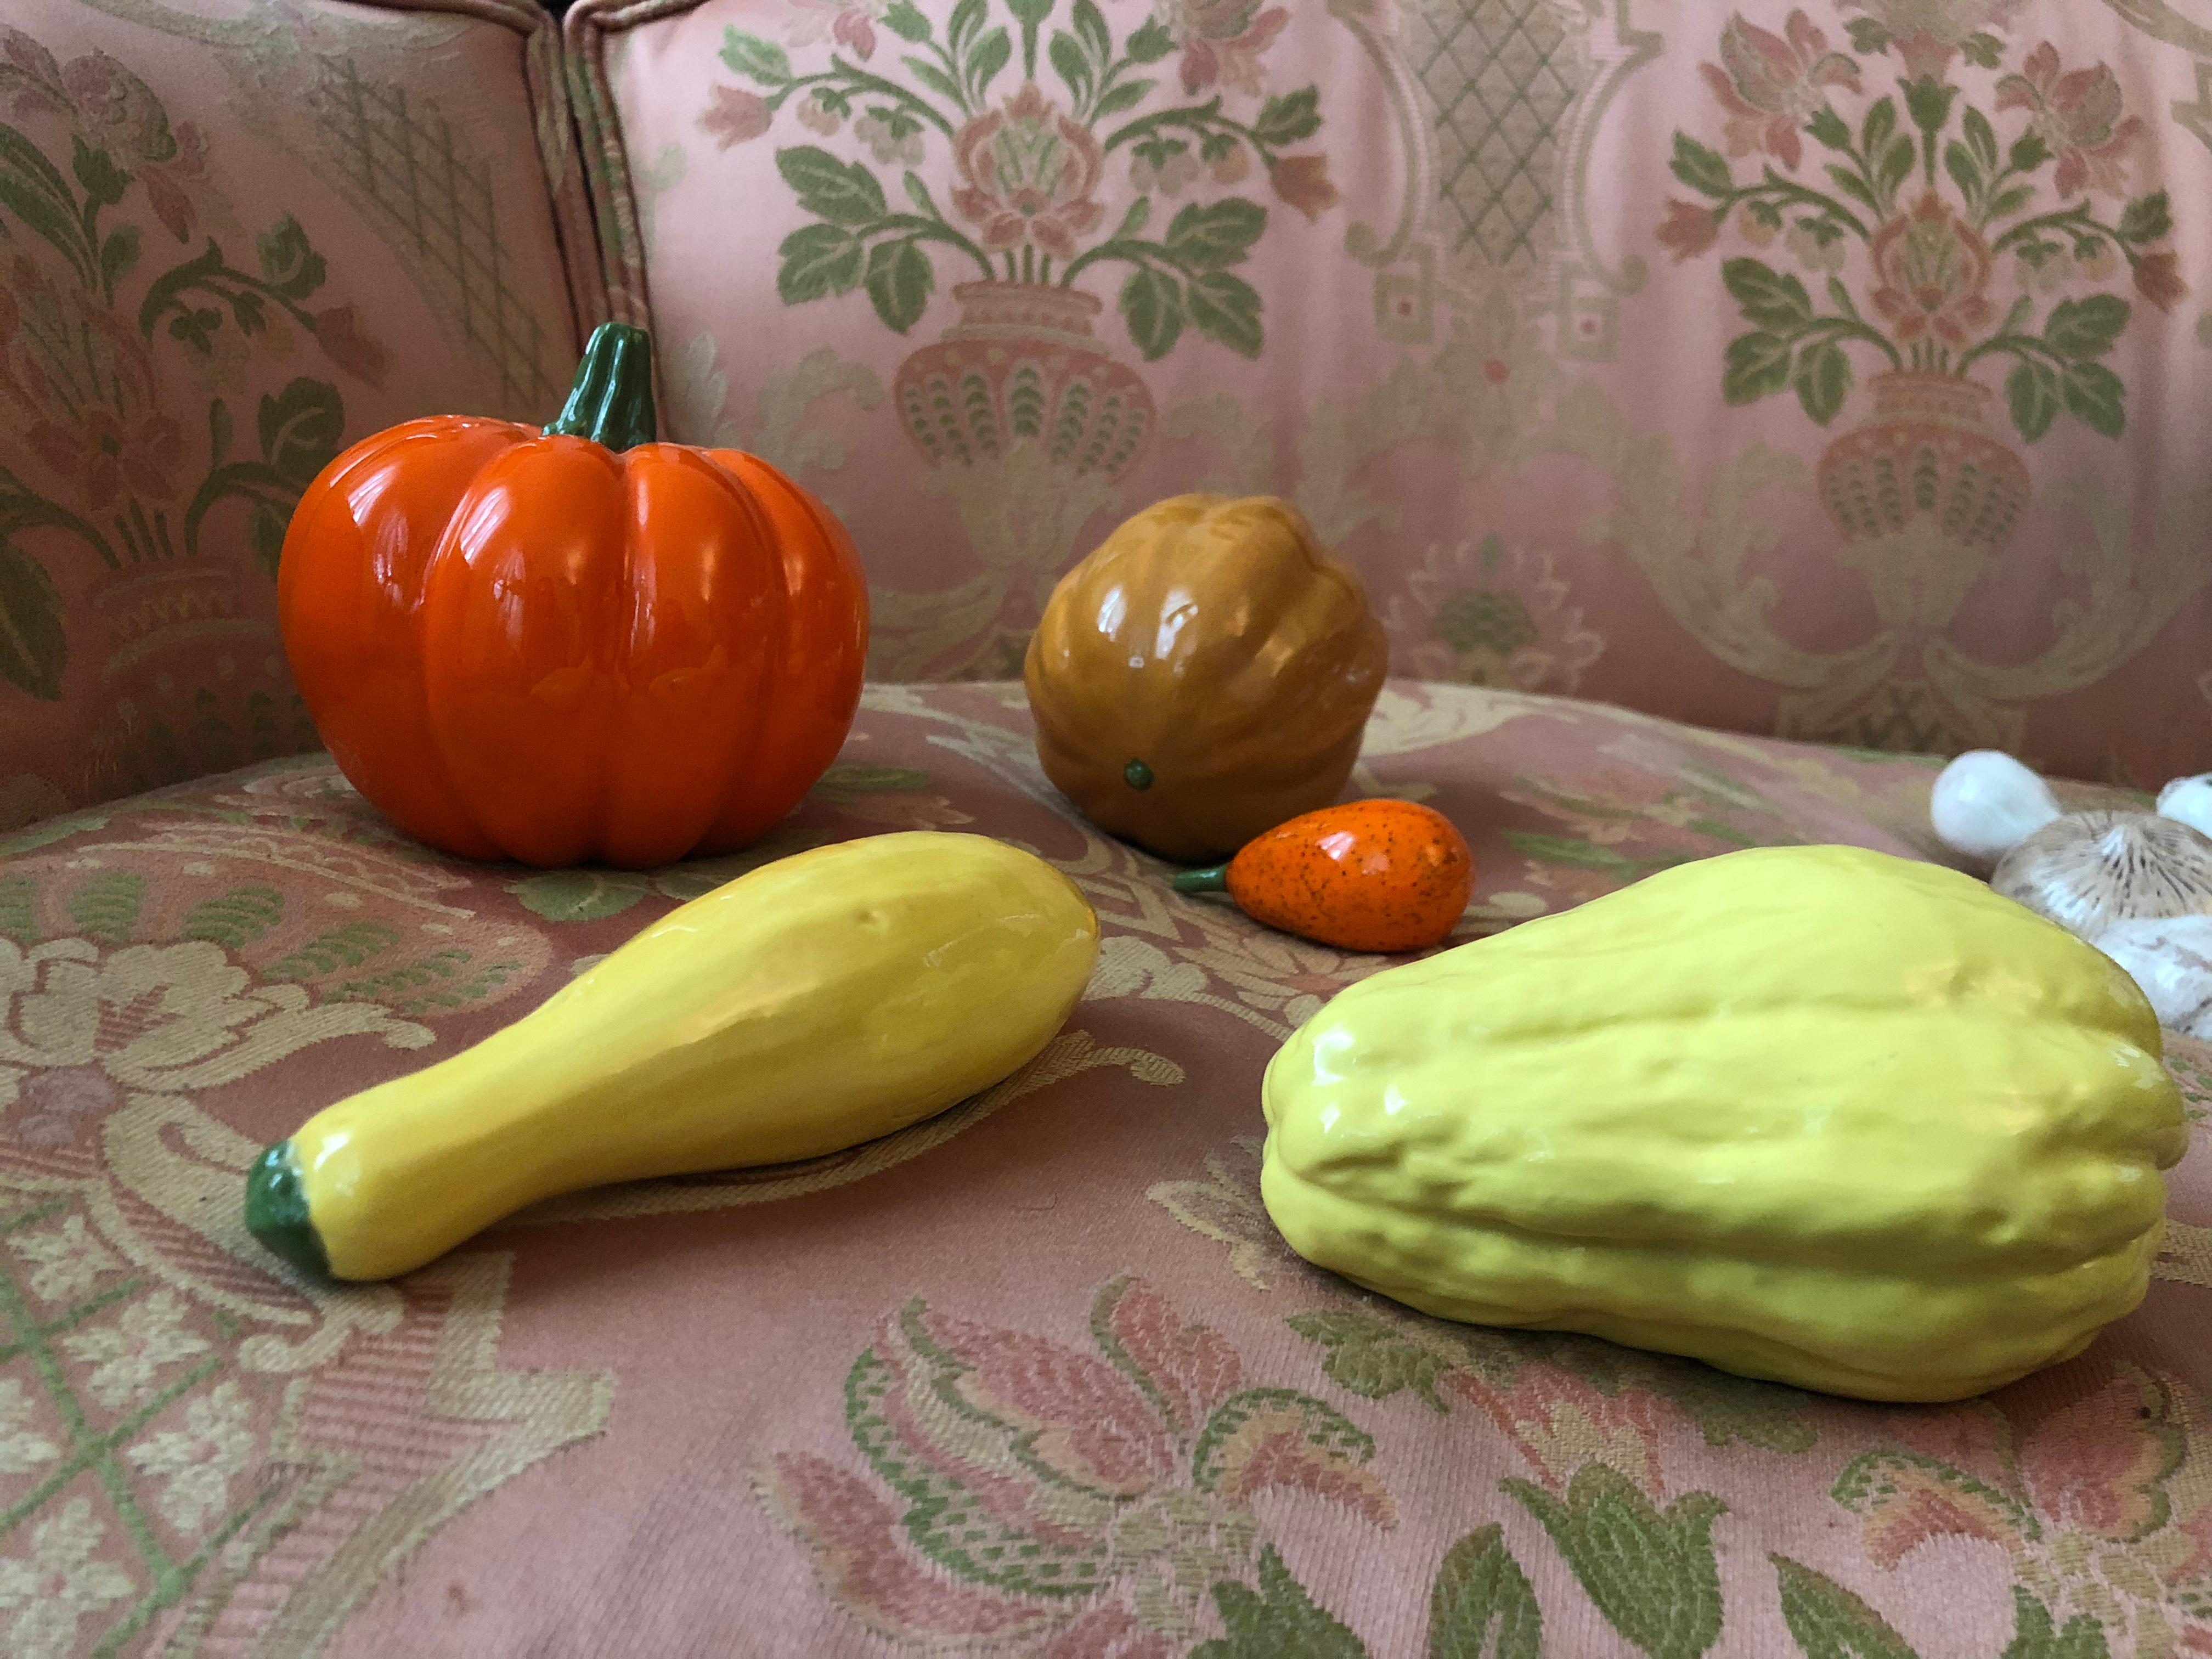 Vintage porcelain Cornucopia vegetable bounty sculptural set, handmade, Signed. Midcentury ceramic. Most pieces initialed by artist. 22+ pieces include but is not limited to the following: Cauliflower, Scallion, Red Onion, Turnip, Carrots, Red